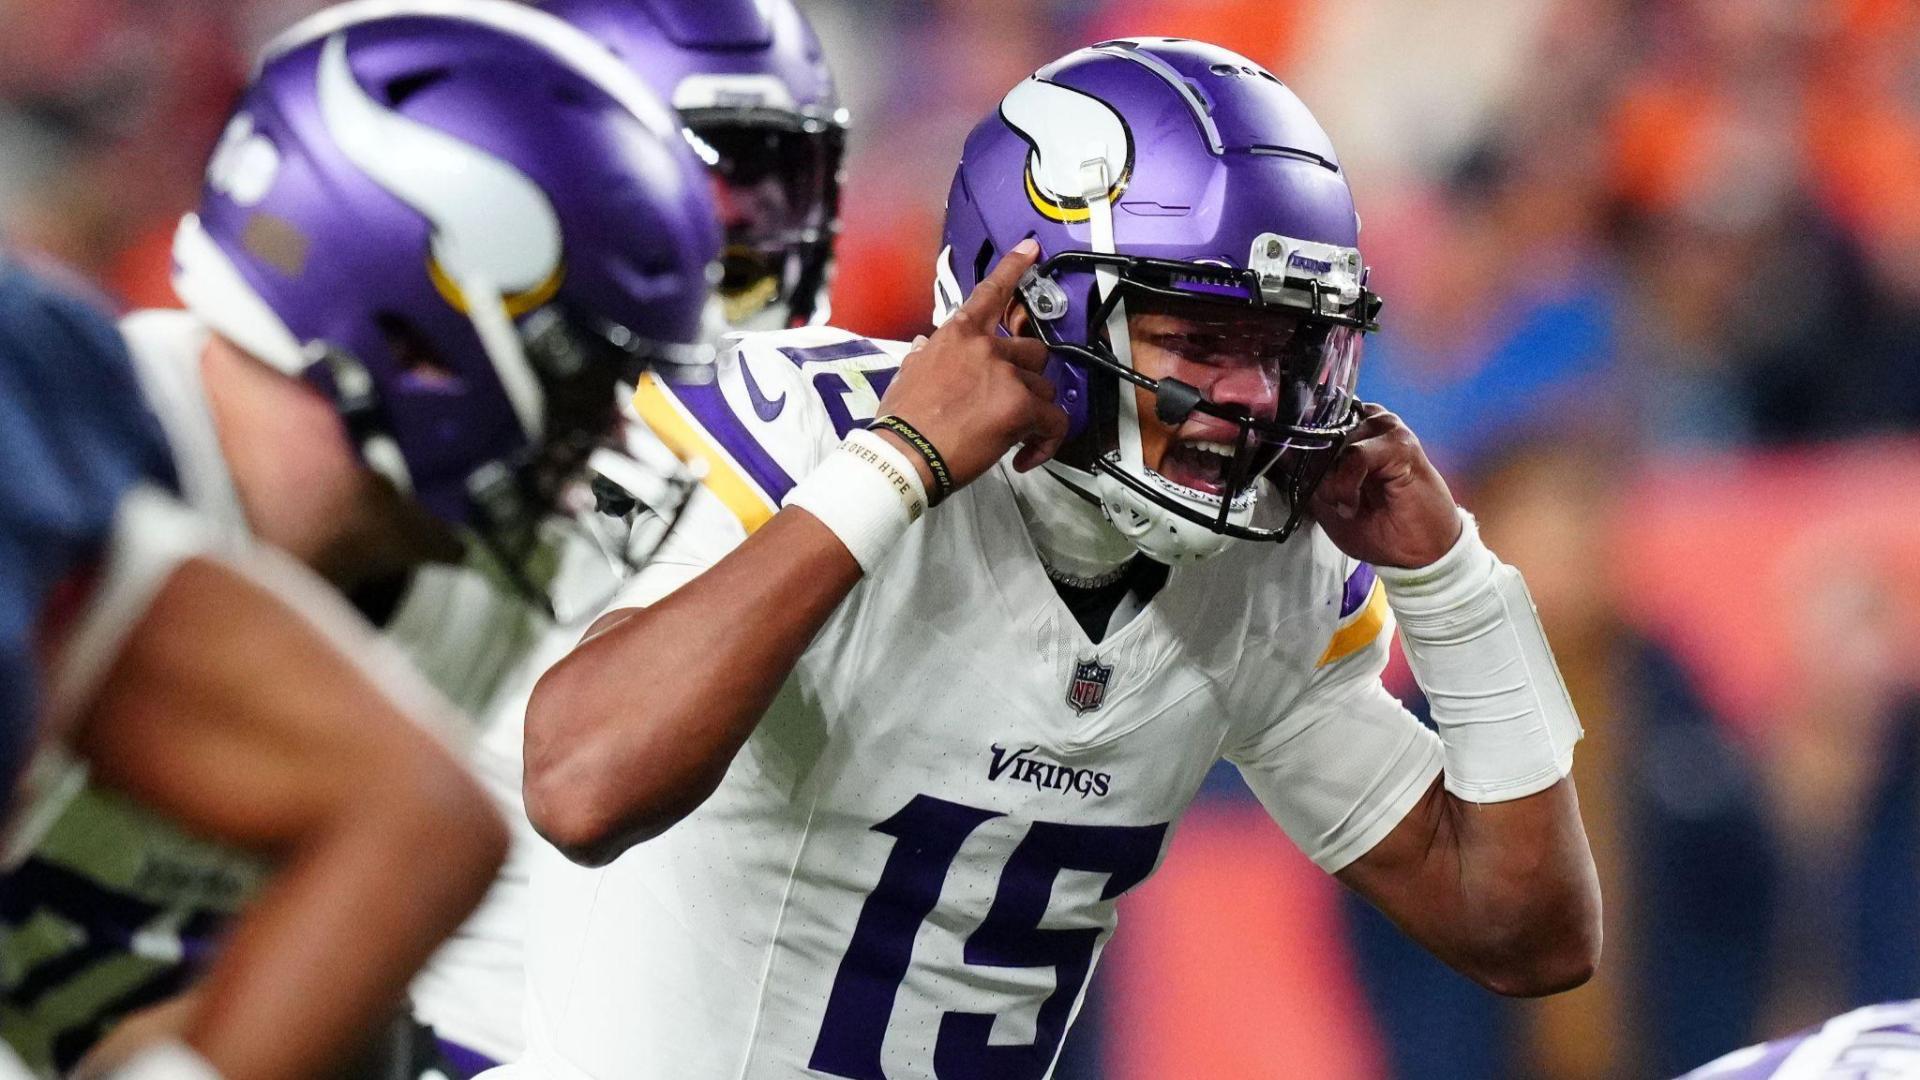 Minnesota Viking quarterback Joshua Dobbs (15) reacts against the Denver Broncos in the fourth quarter at Empower Field at Mile High.